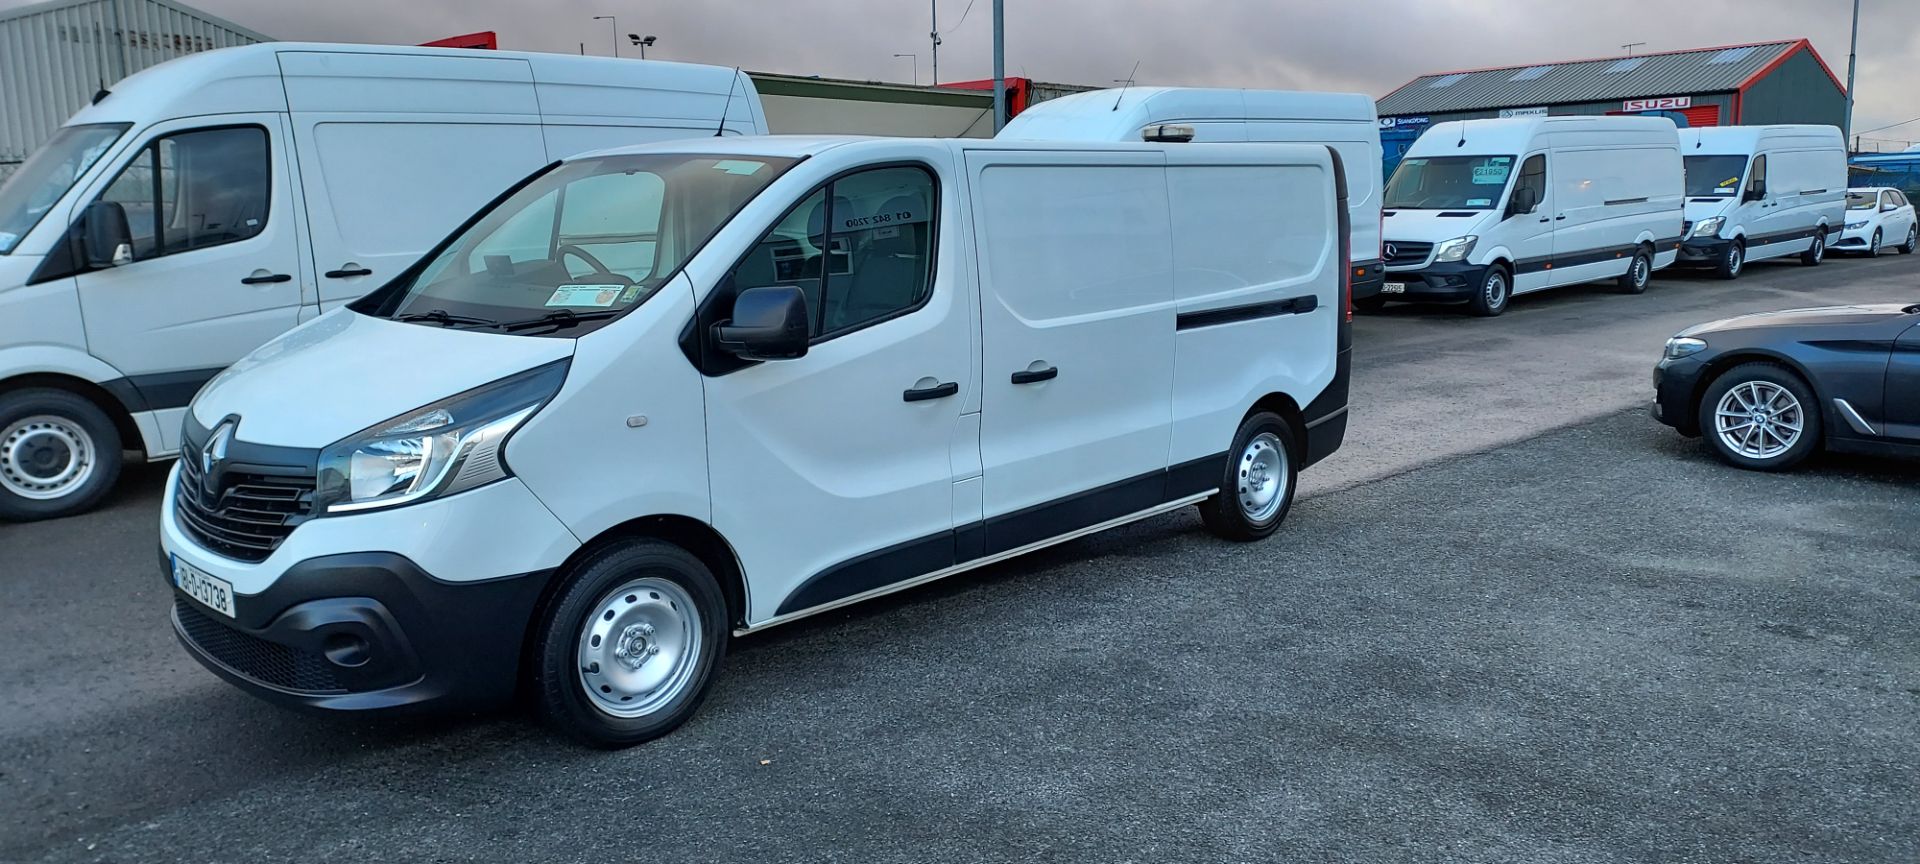 2018 Renault Trafic LL29 DCI 120 Business 3DR (181D13738) Thumbnail 3